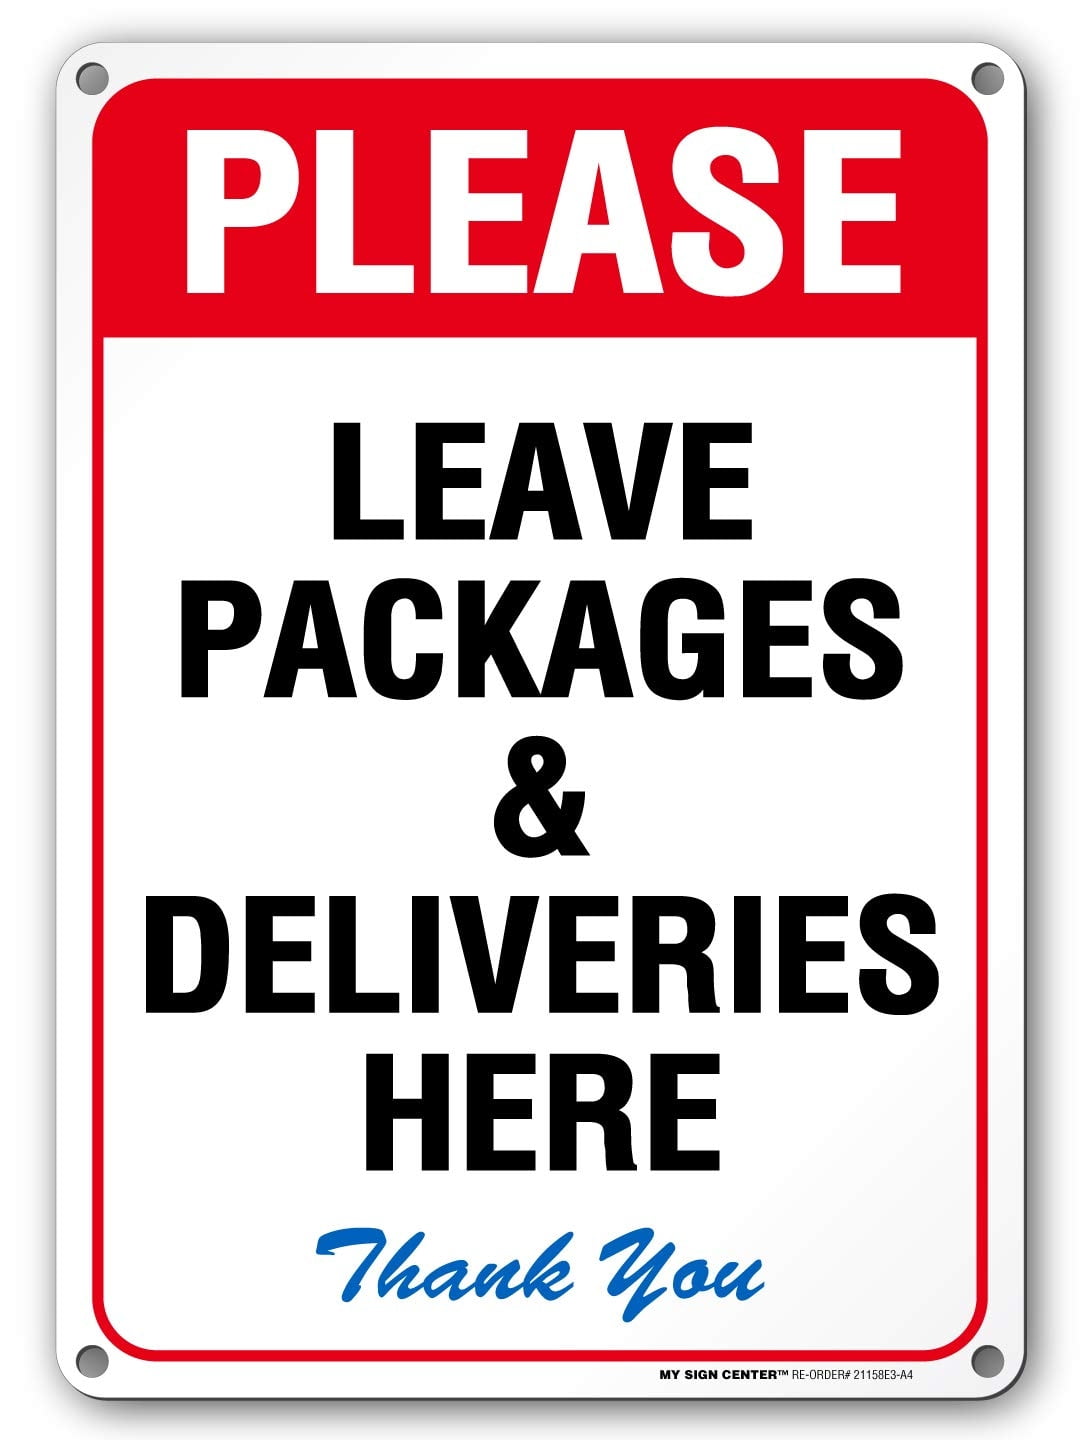 Amazon Please Leave All Packages Deliveries Here Sign 10 X 14 040 Rust Free Metal Made In USA UV Protected And Weatherproof 21158E3 A4 Industrial Scientific